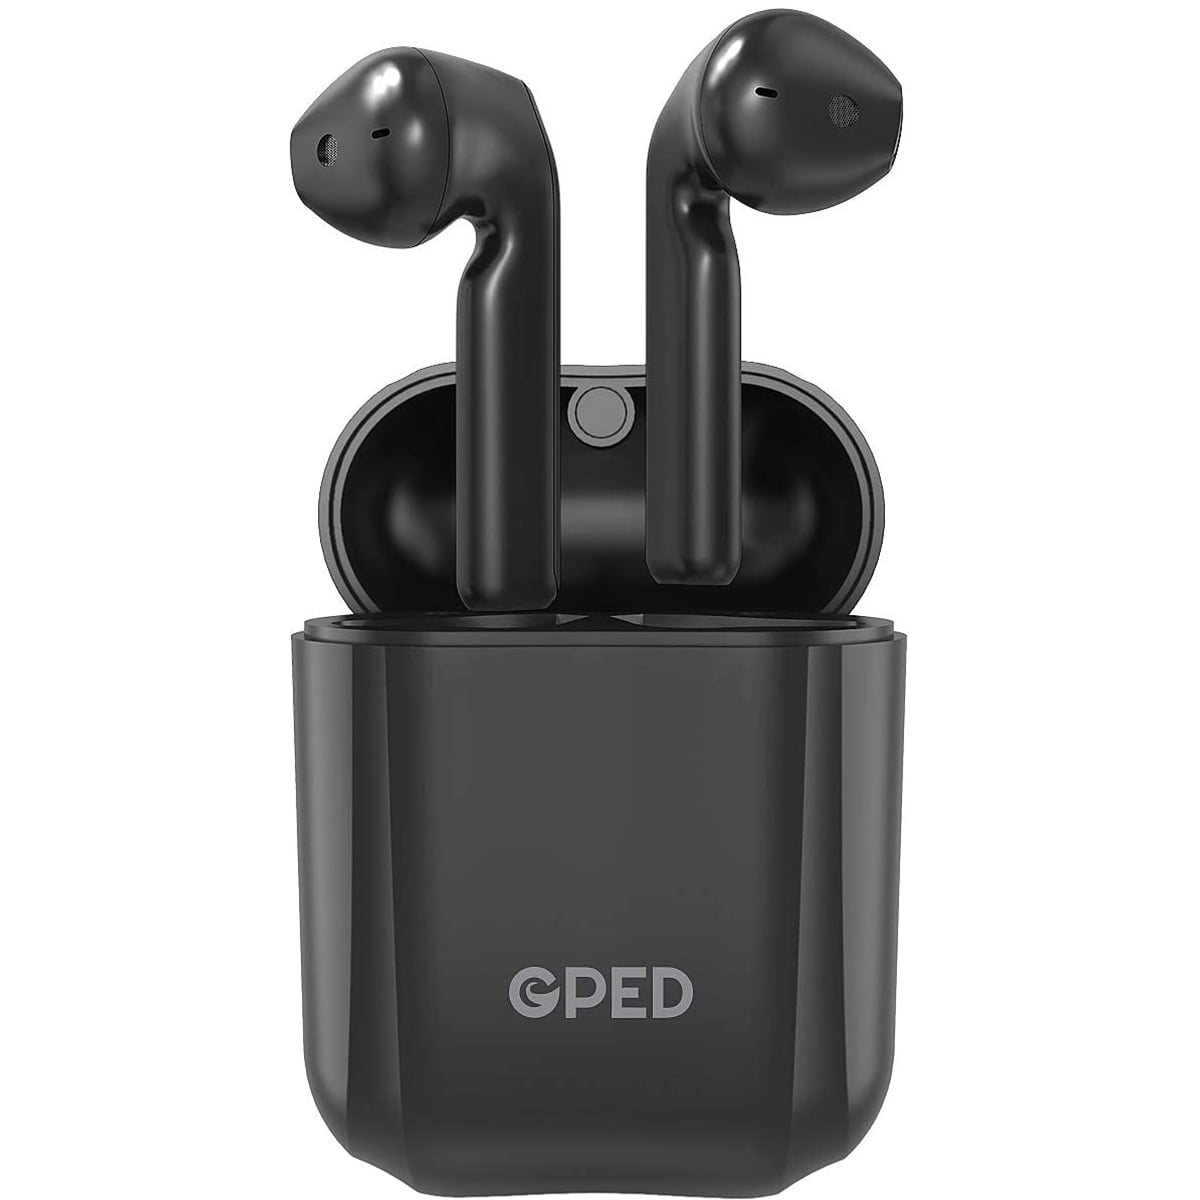 Wireless Earbuds Stereo Wireless Earphones with USB-C Quick Charge Bporerxh Bluetooth 5.1 Earbuds Wireless Headphones Built-in 4 Microphones IPX7 Waterproof for Sports 30H Playtime Touch Control